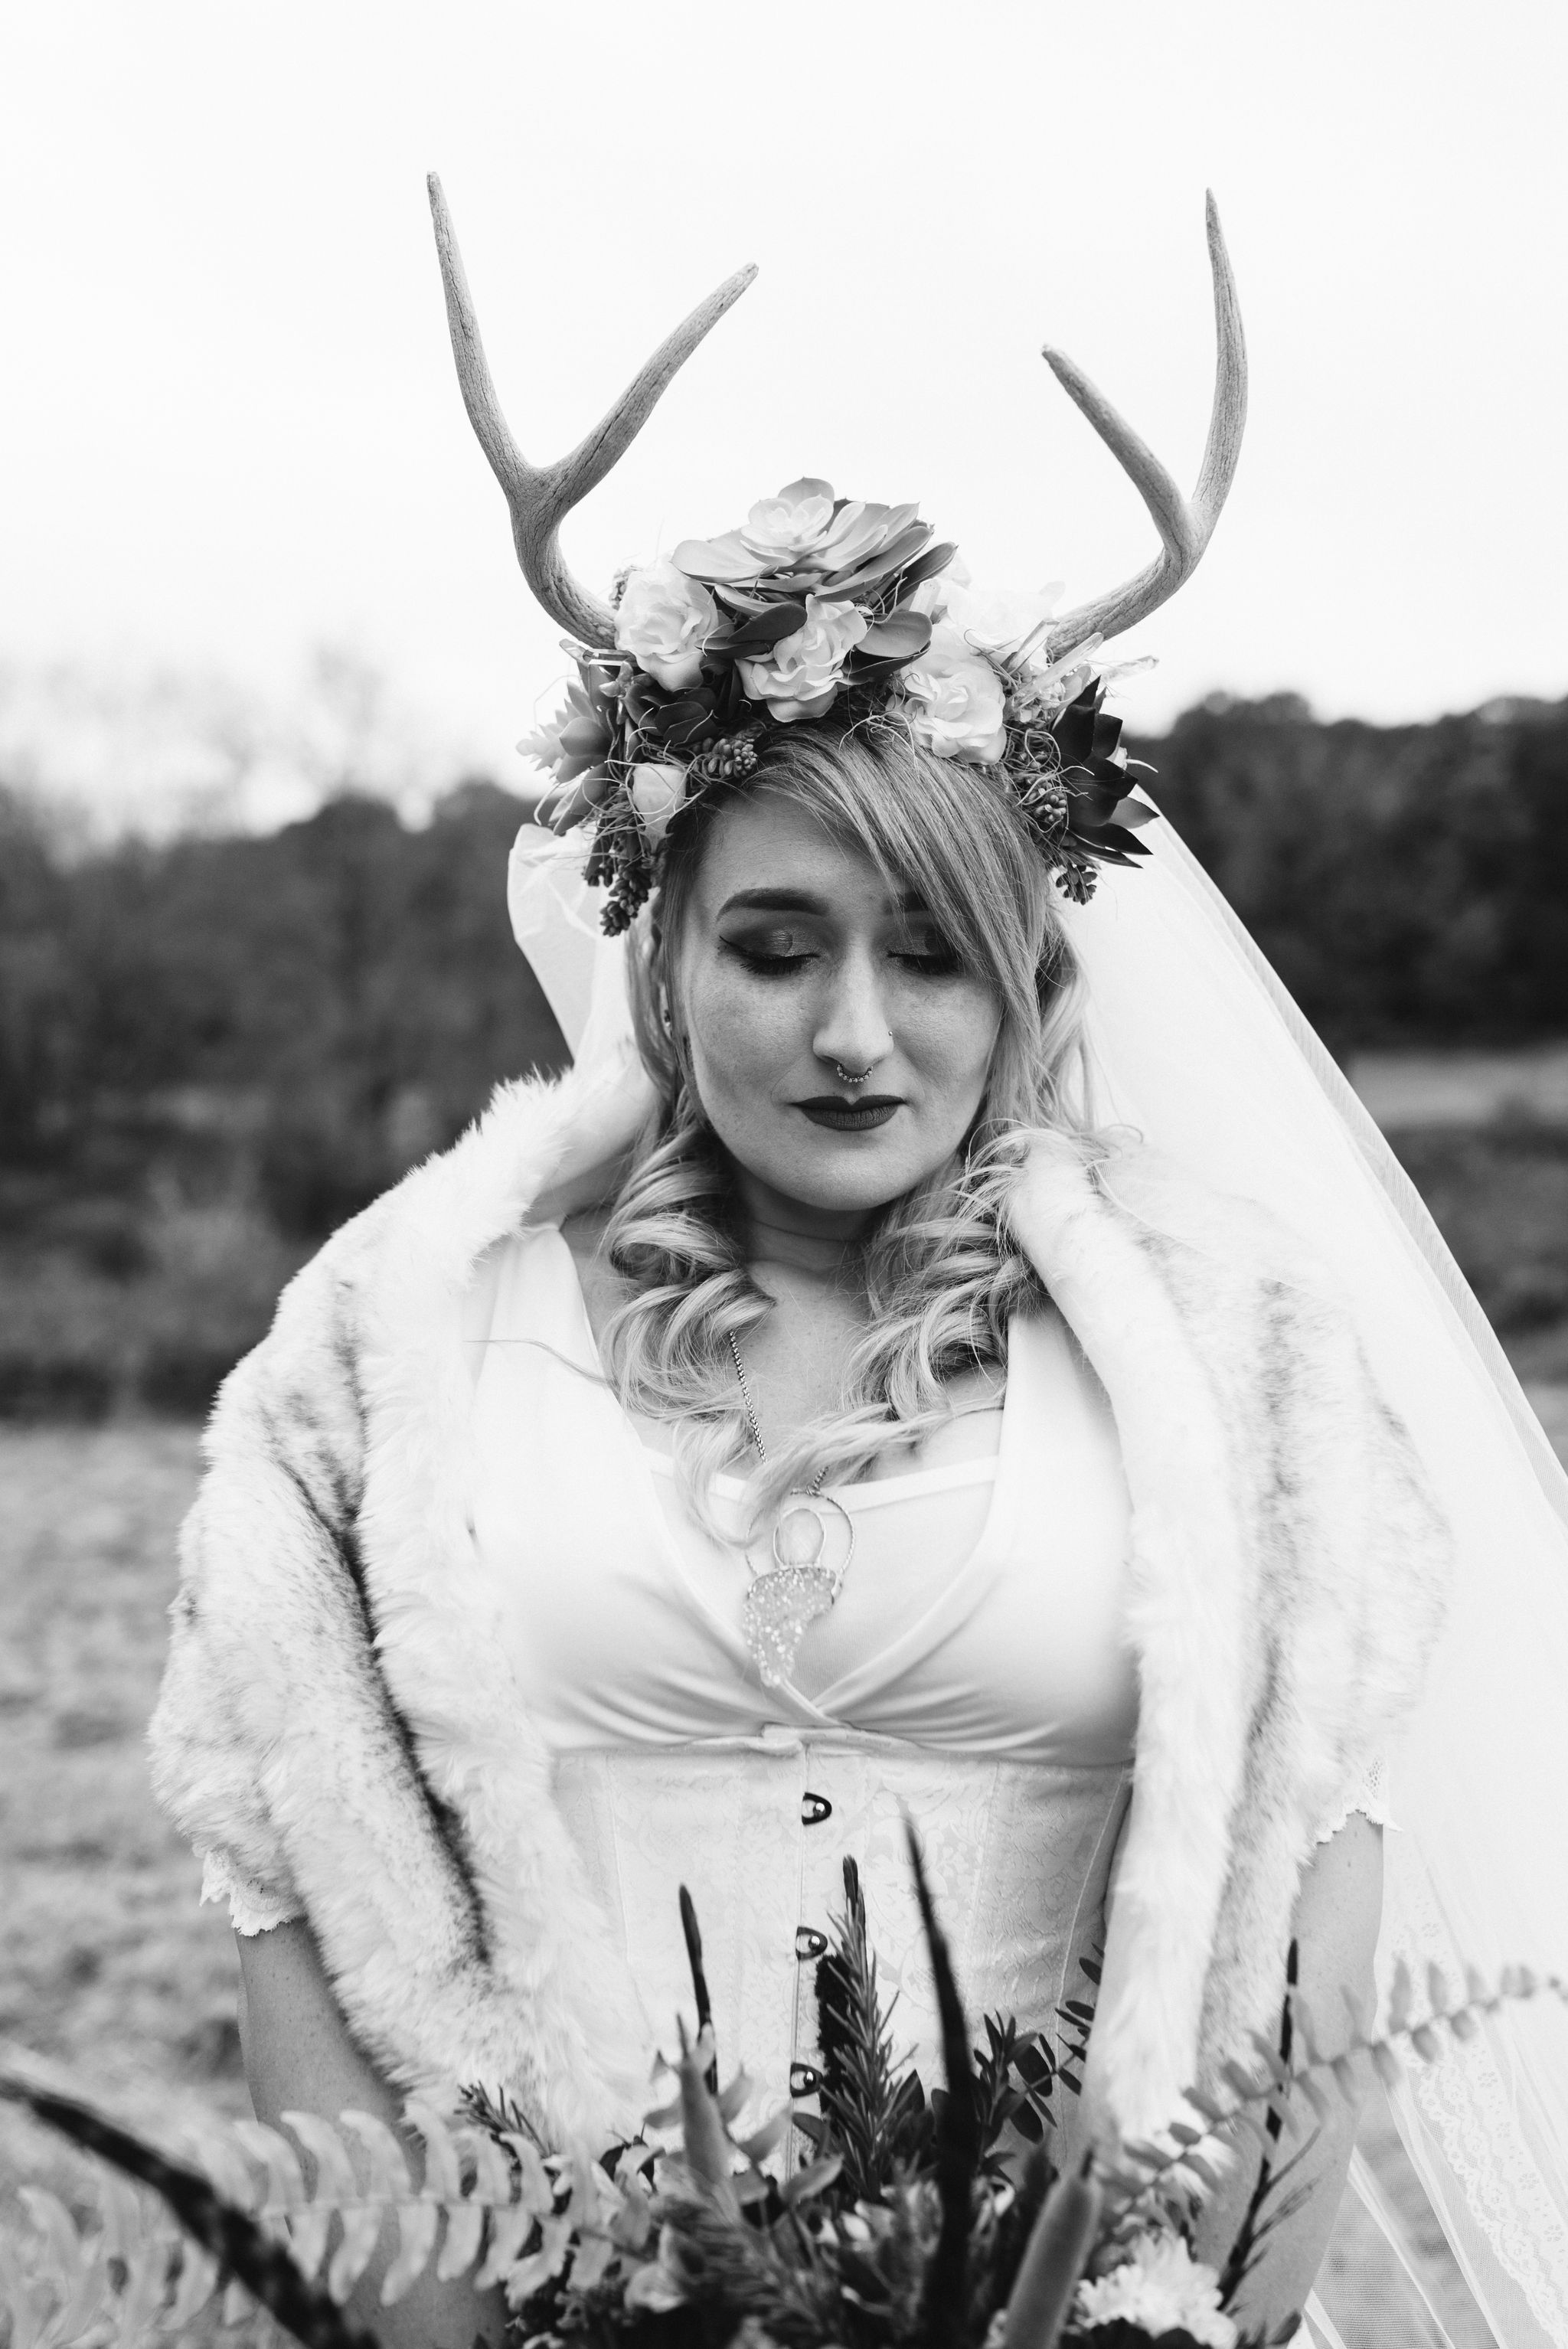  Maryland, Baltimore Wedding Photographer, Backyard Wedding, Fall, October, Dark Bohemian, Whimsical, Fun, Bridal Makeup, Black and White Portrait of Bride, Flower Crown with Antlers 